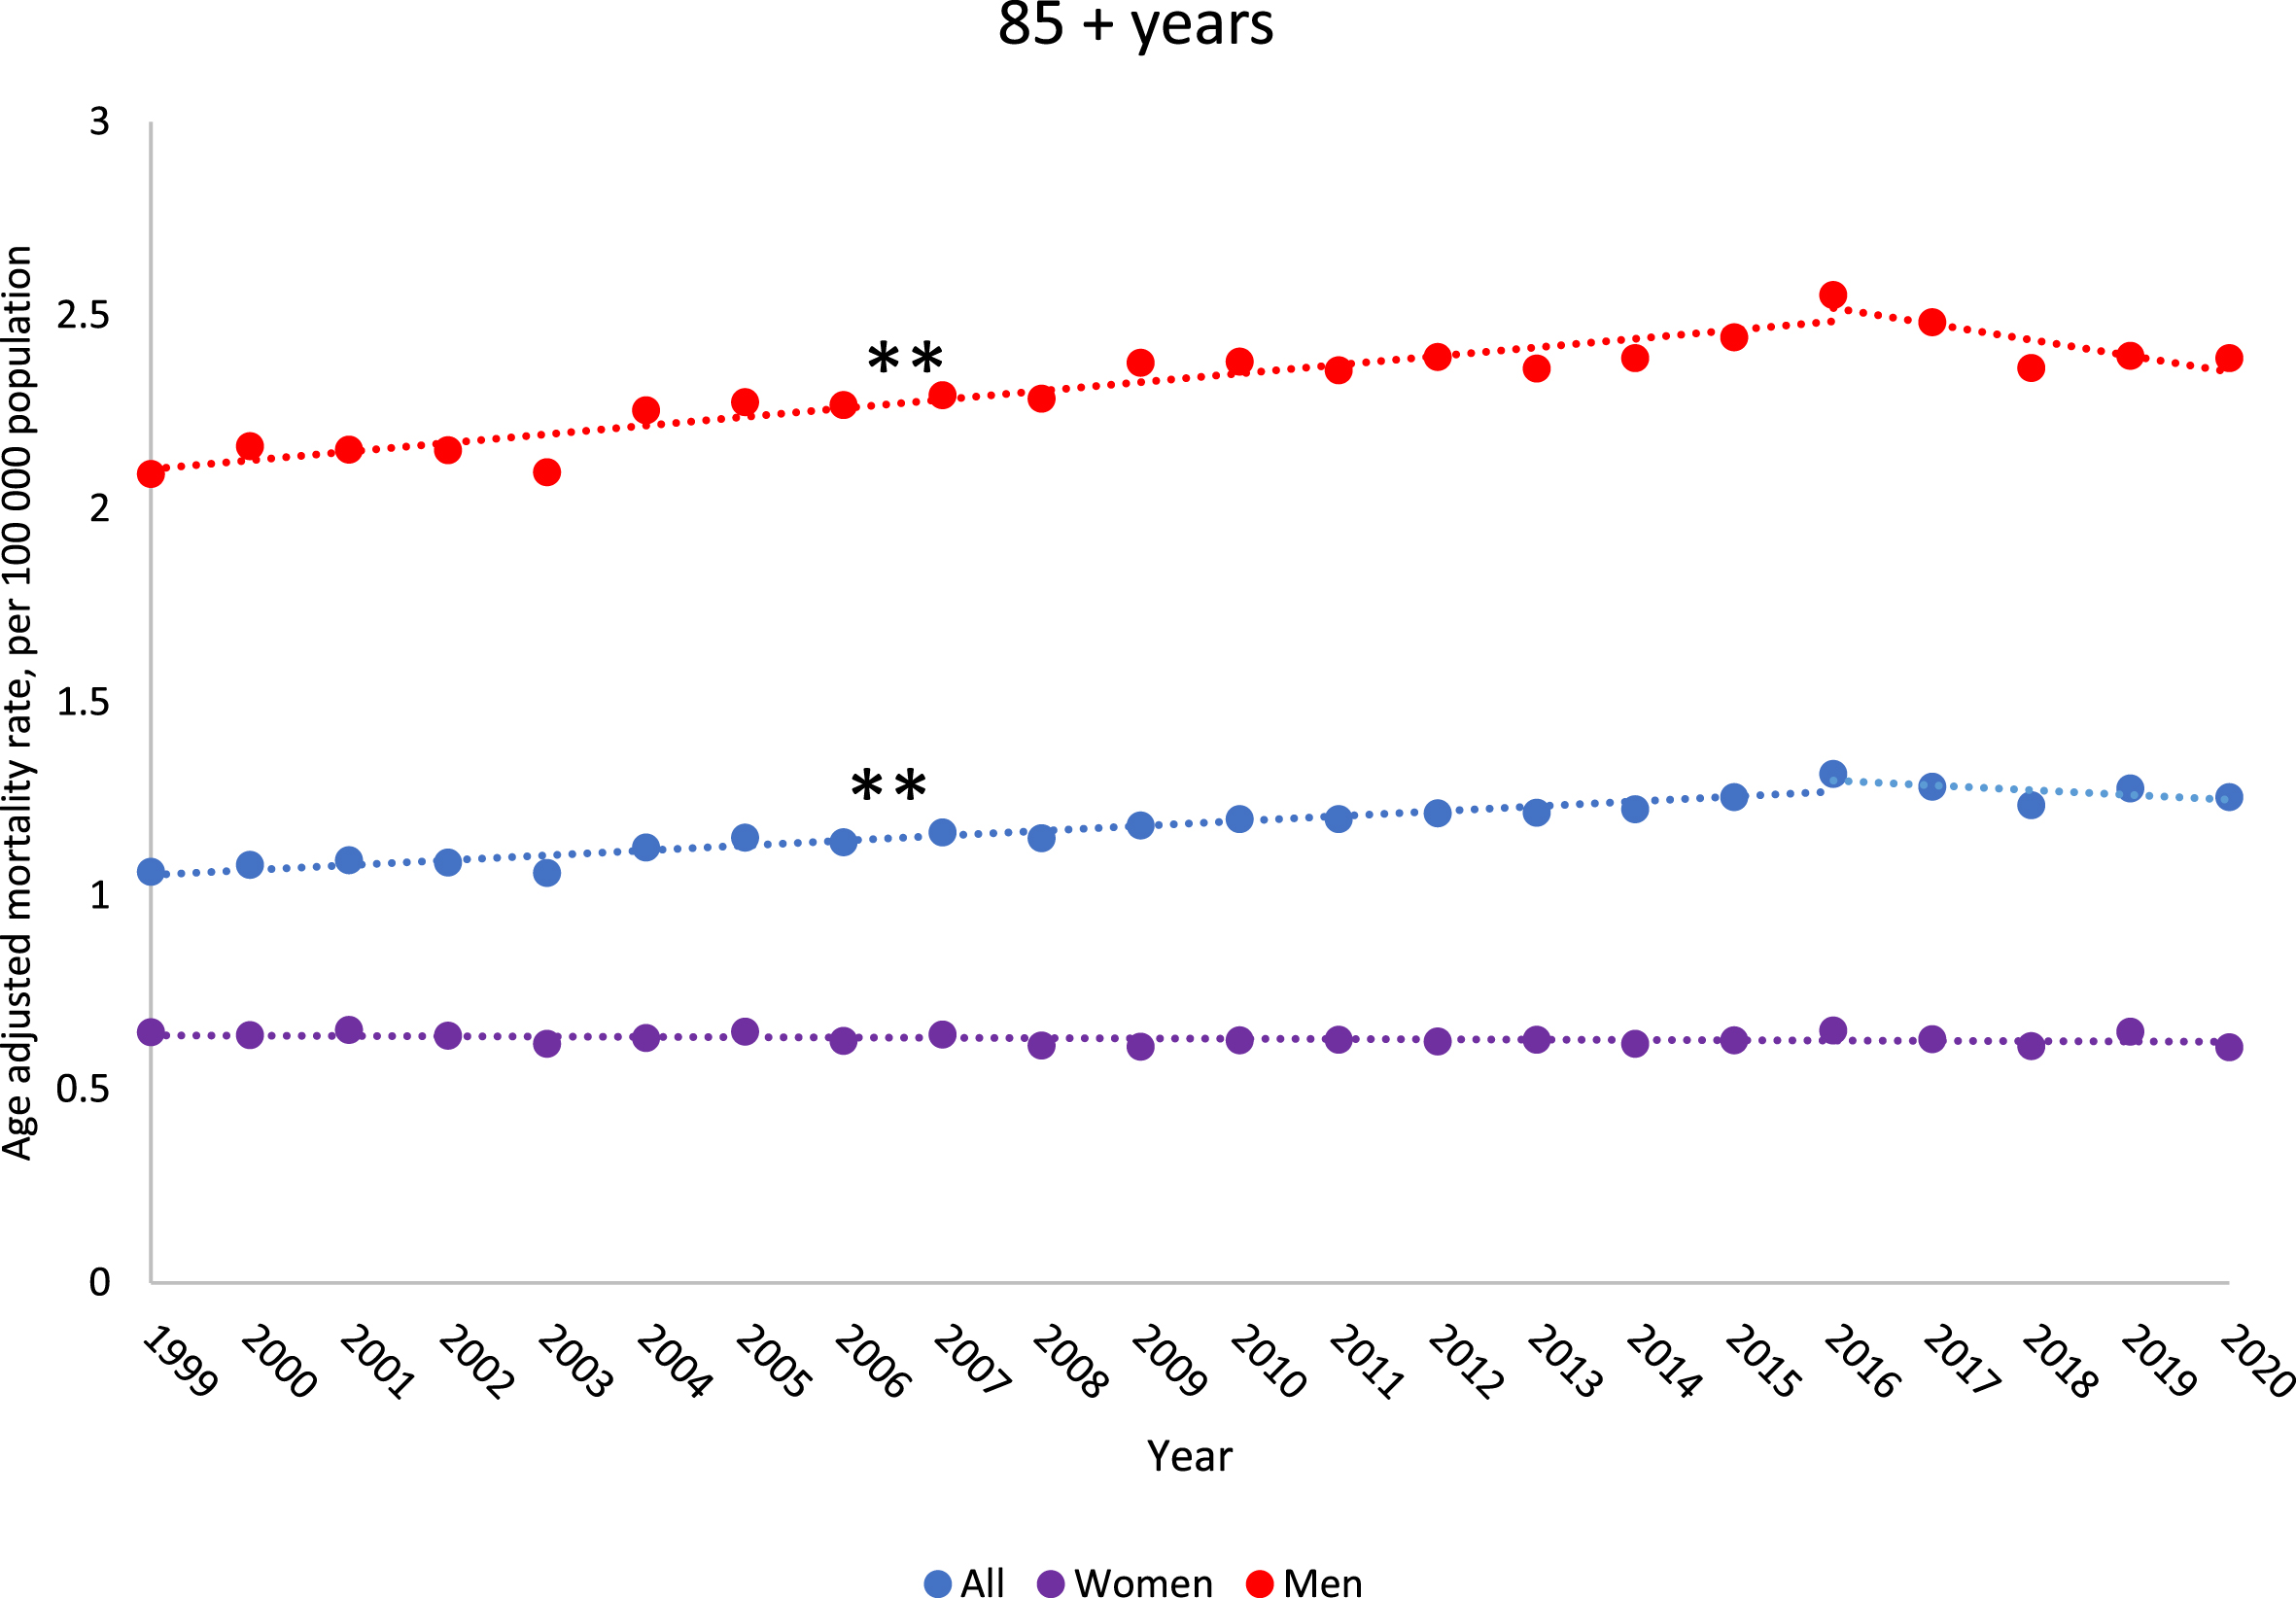 Trends in bladder cancer death rates from 1999–2020 among US population 85 years and older by gender. Observed rates are presented per 100,000 population and represented by “•”. Modeled trends are represented by “—”. ** indicates the p-value is significant after Holm-Bonferroni correction. * indicates the p-value is < 0.05, but not significant after Holm-Bonferroni correction.